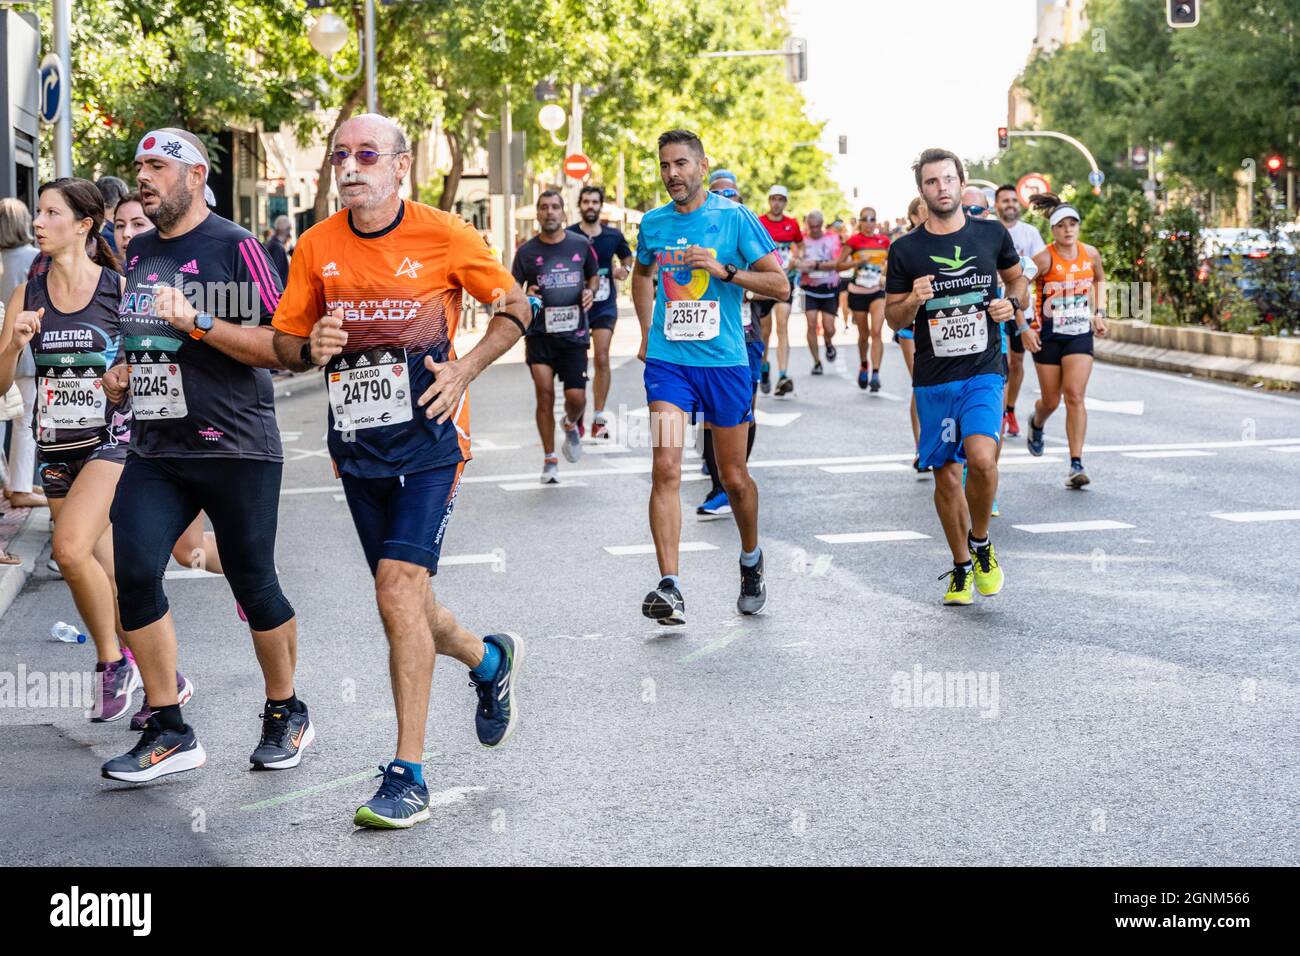 Madrid, Spain - September 26, 2021: Group of runners in full effort during  the Madrid Rock and Roll Marathon race Stock Photo - Alamy